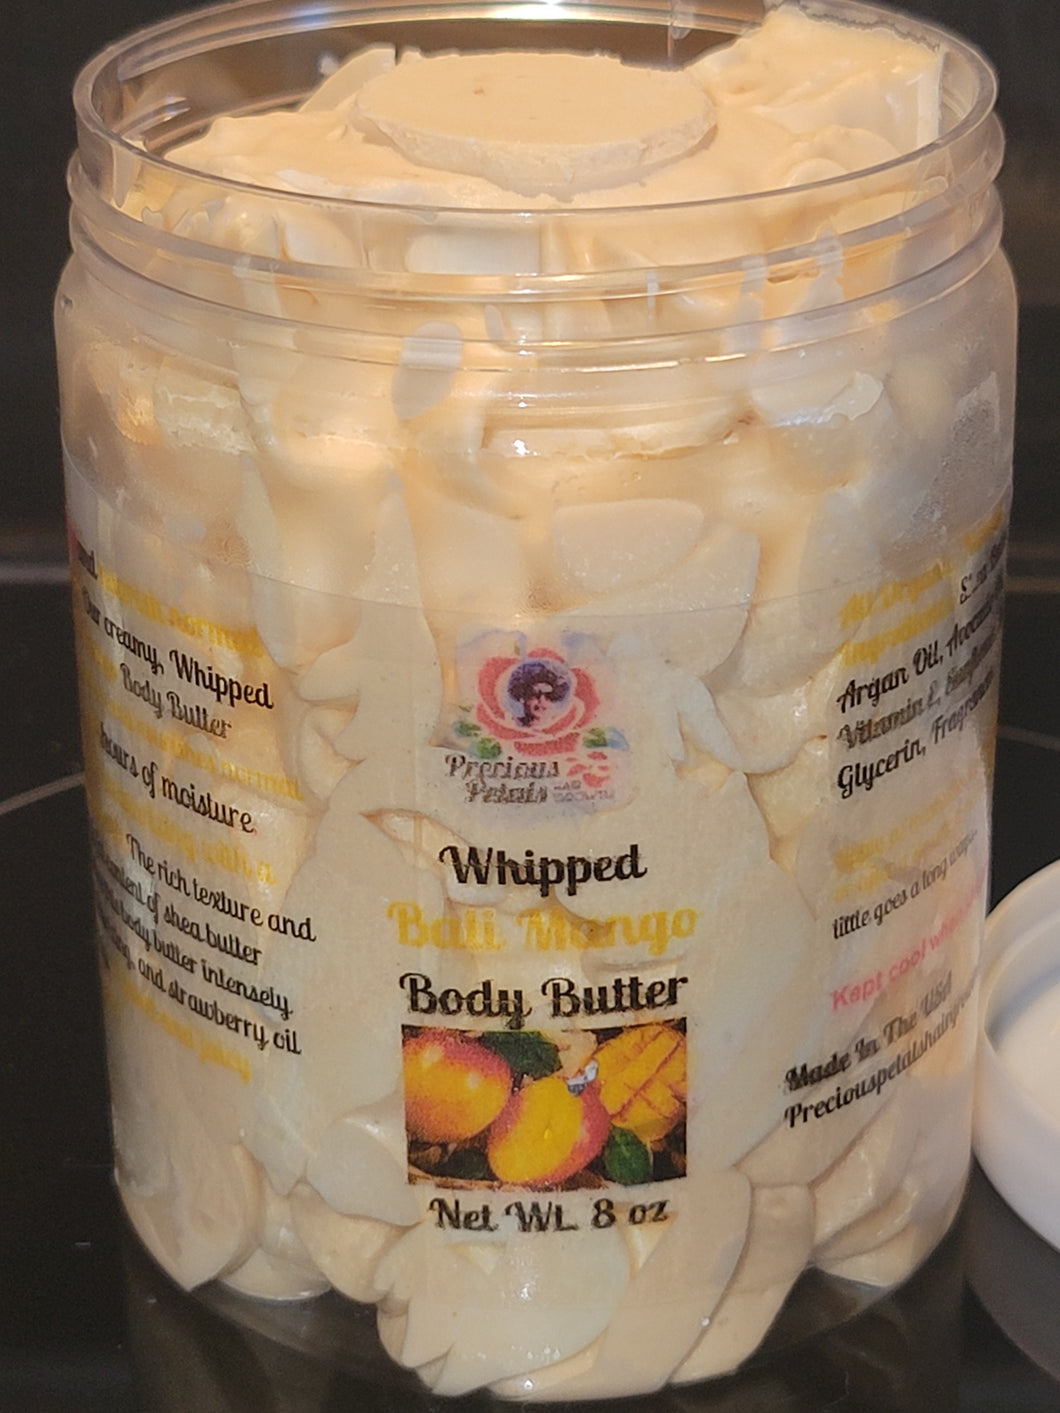 BODY BUTTER***Whipped Bali Mango Body Butter (organic/natural ingredients)